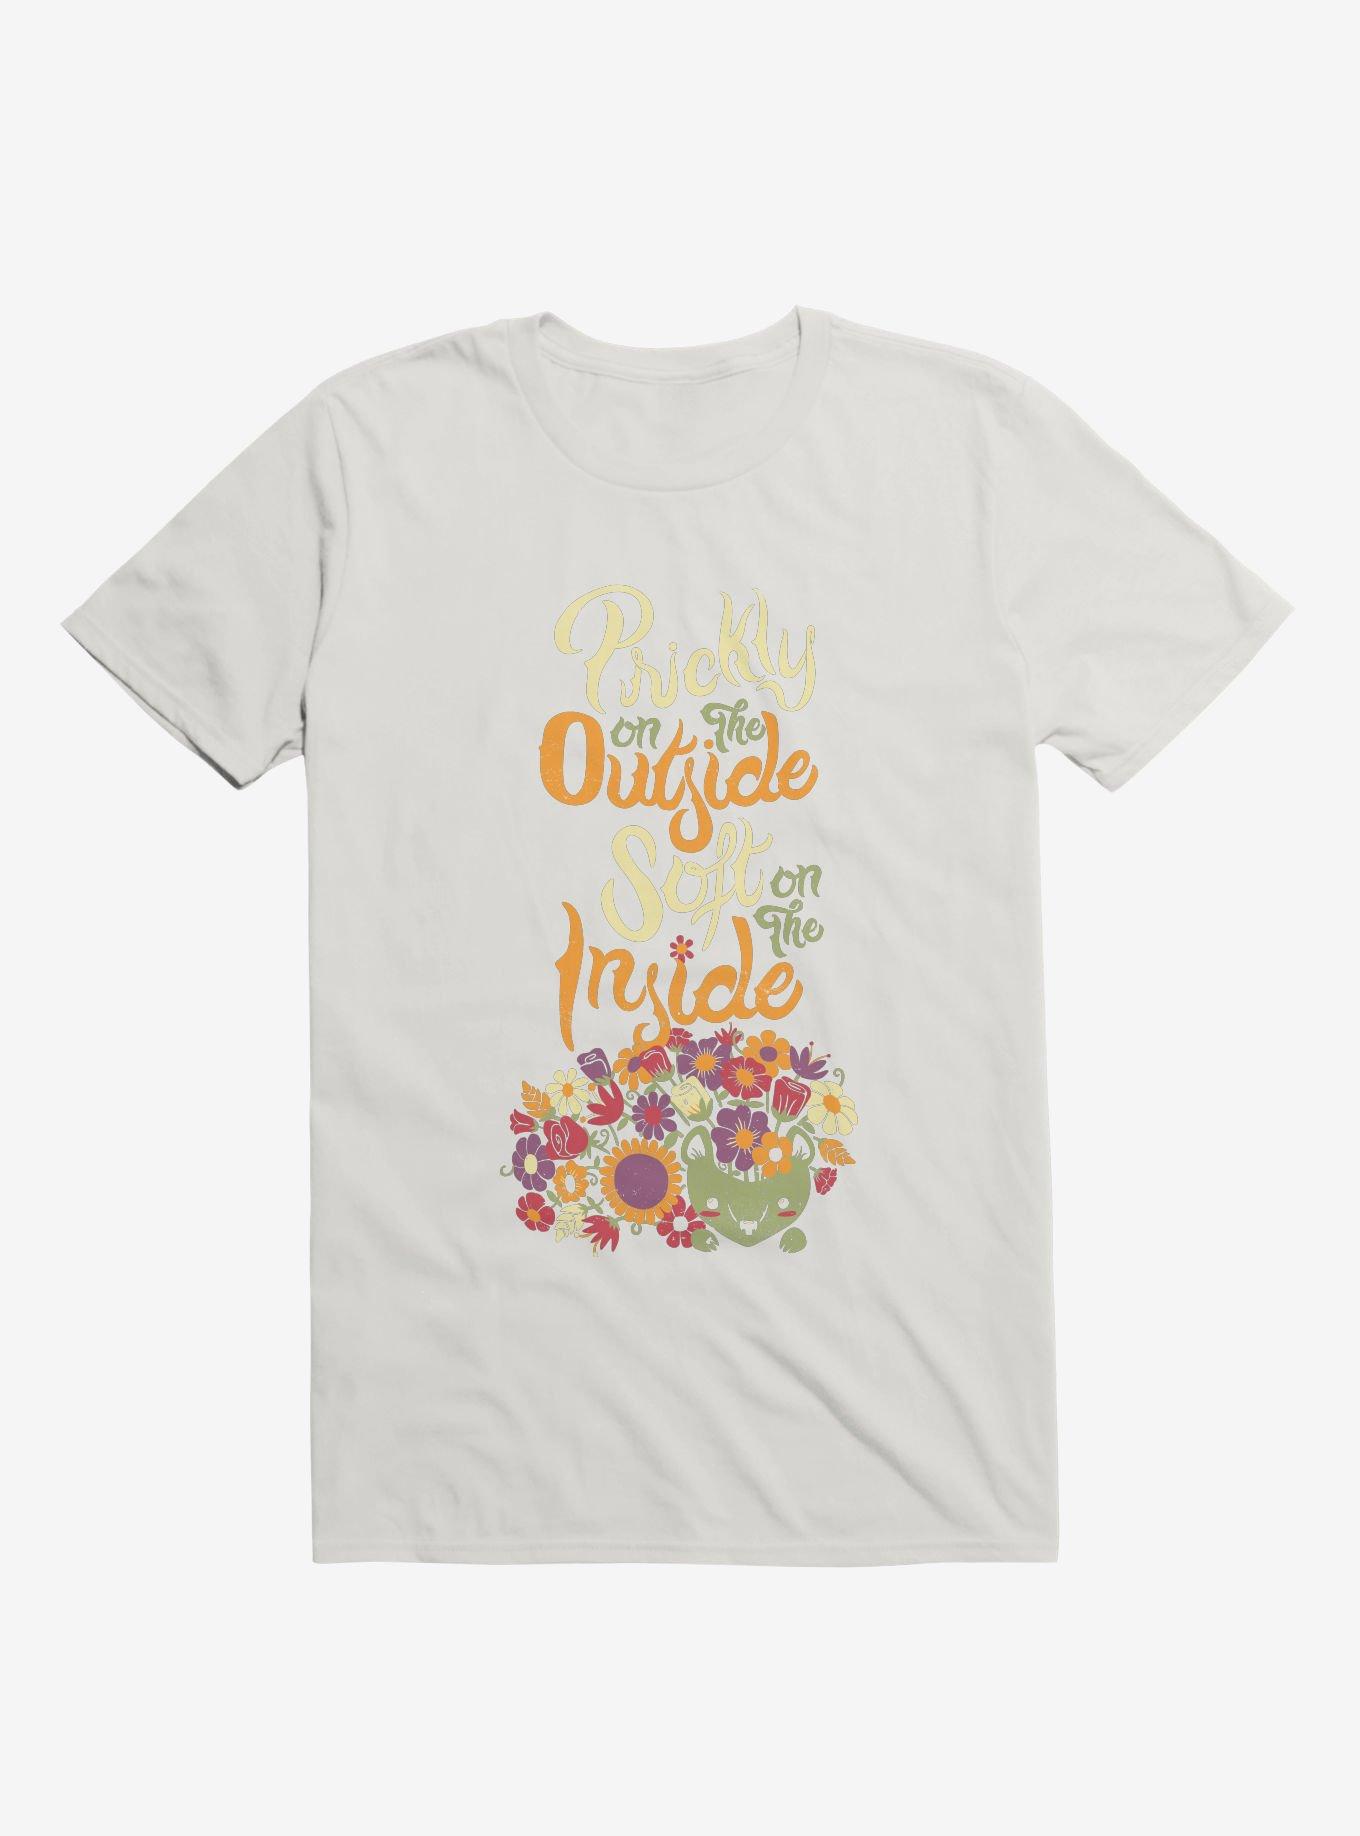 Prickly On The Outside, Soft On The Inside! Hedgehog Flower T-Shirt, WHITE, hi-res